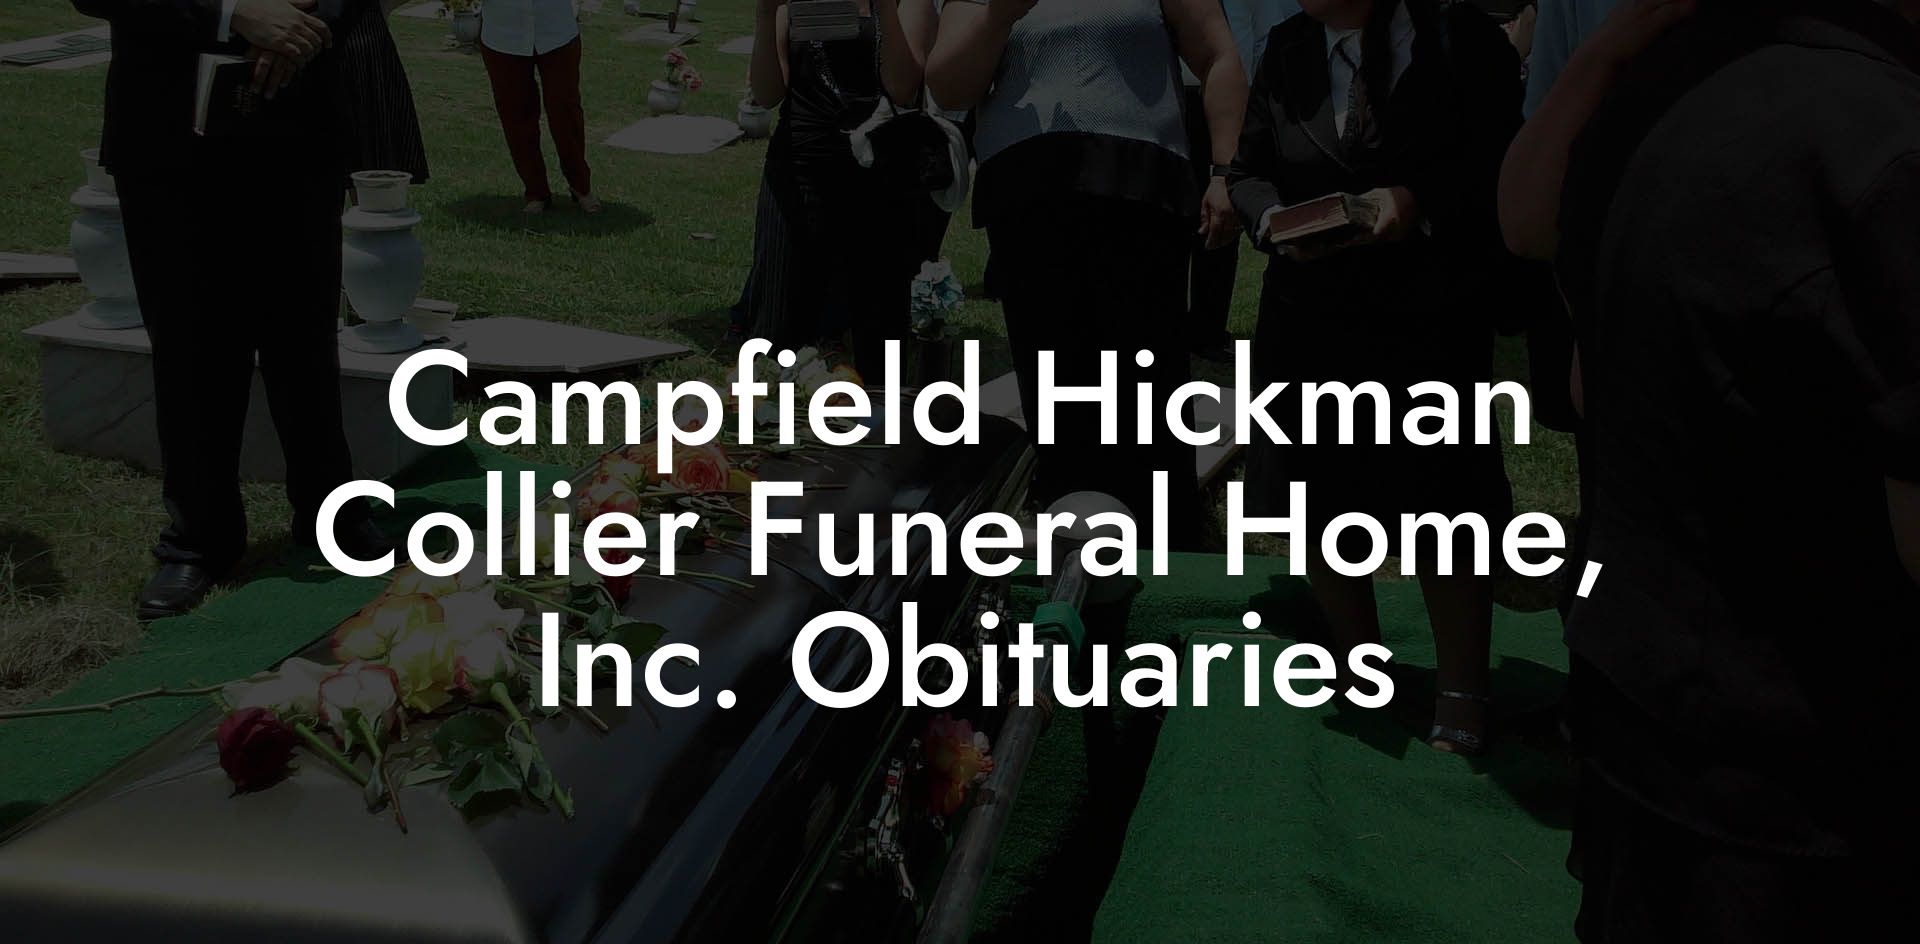 Campfield Hickman Collier Funeral Home, Inc. Obituaries